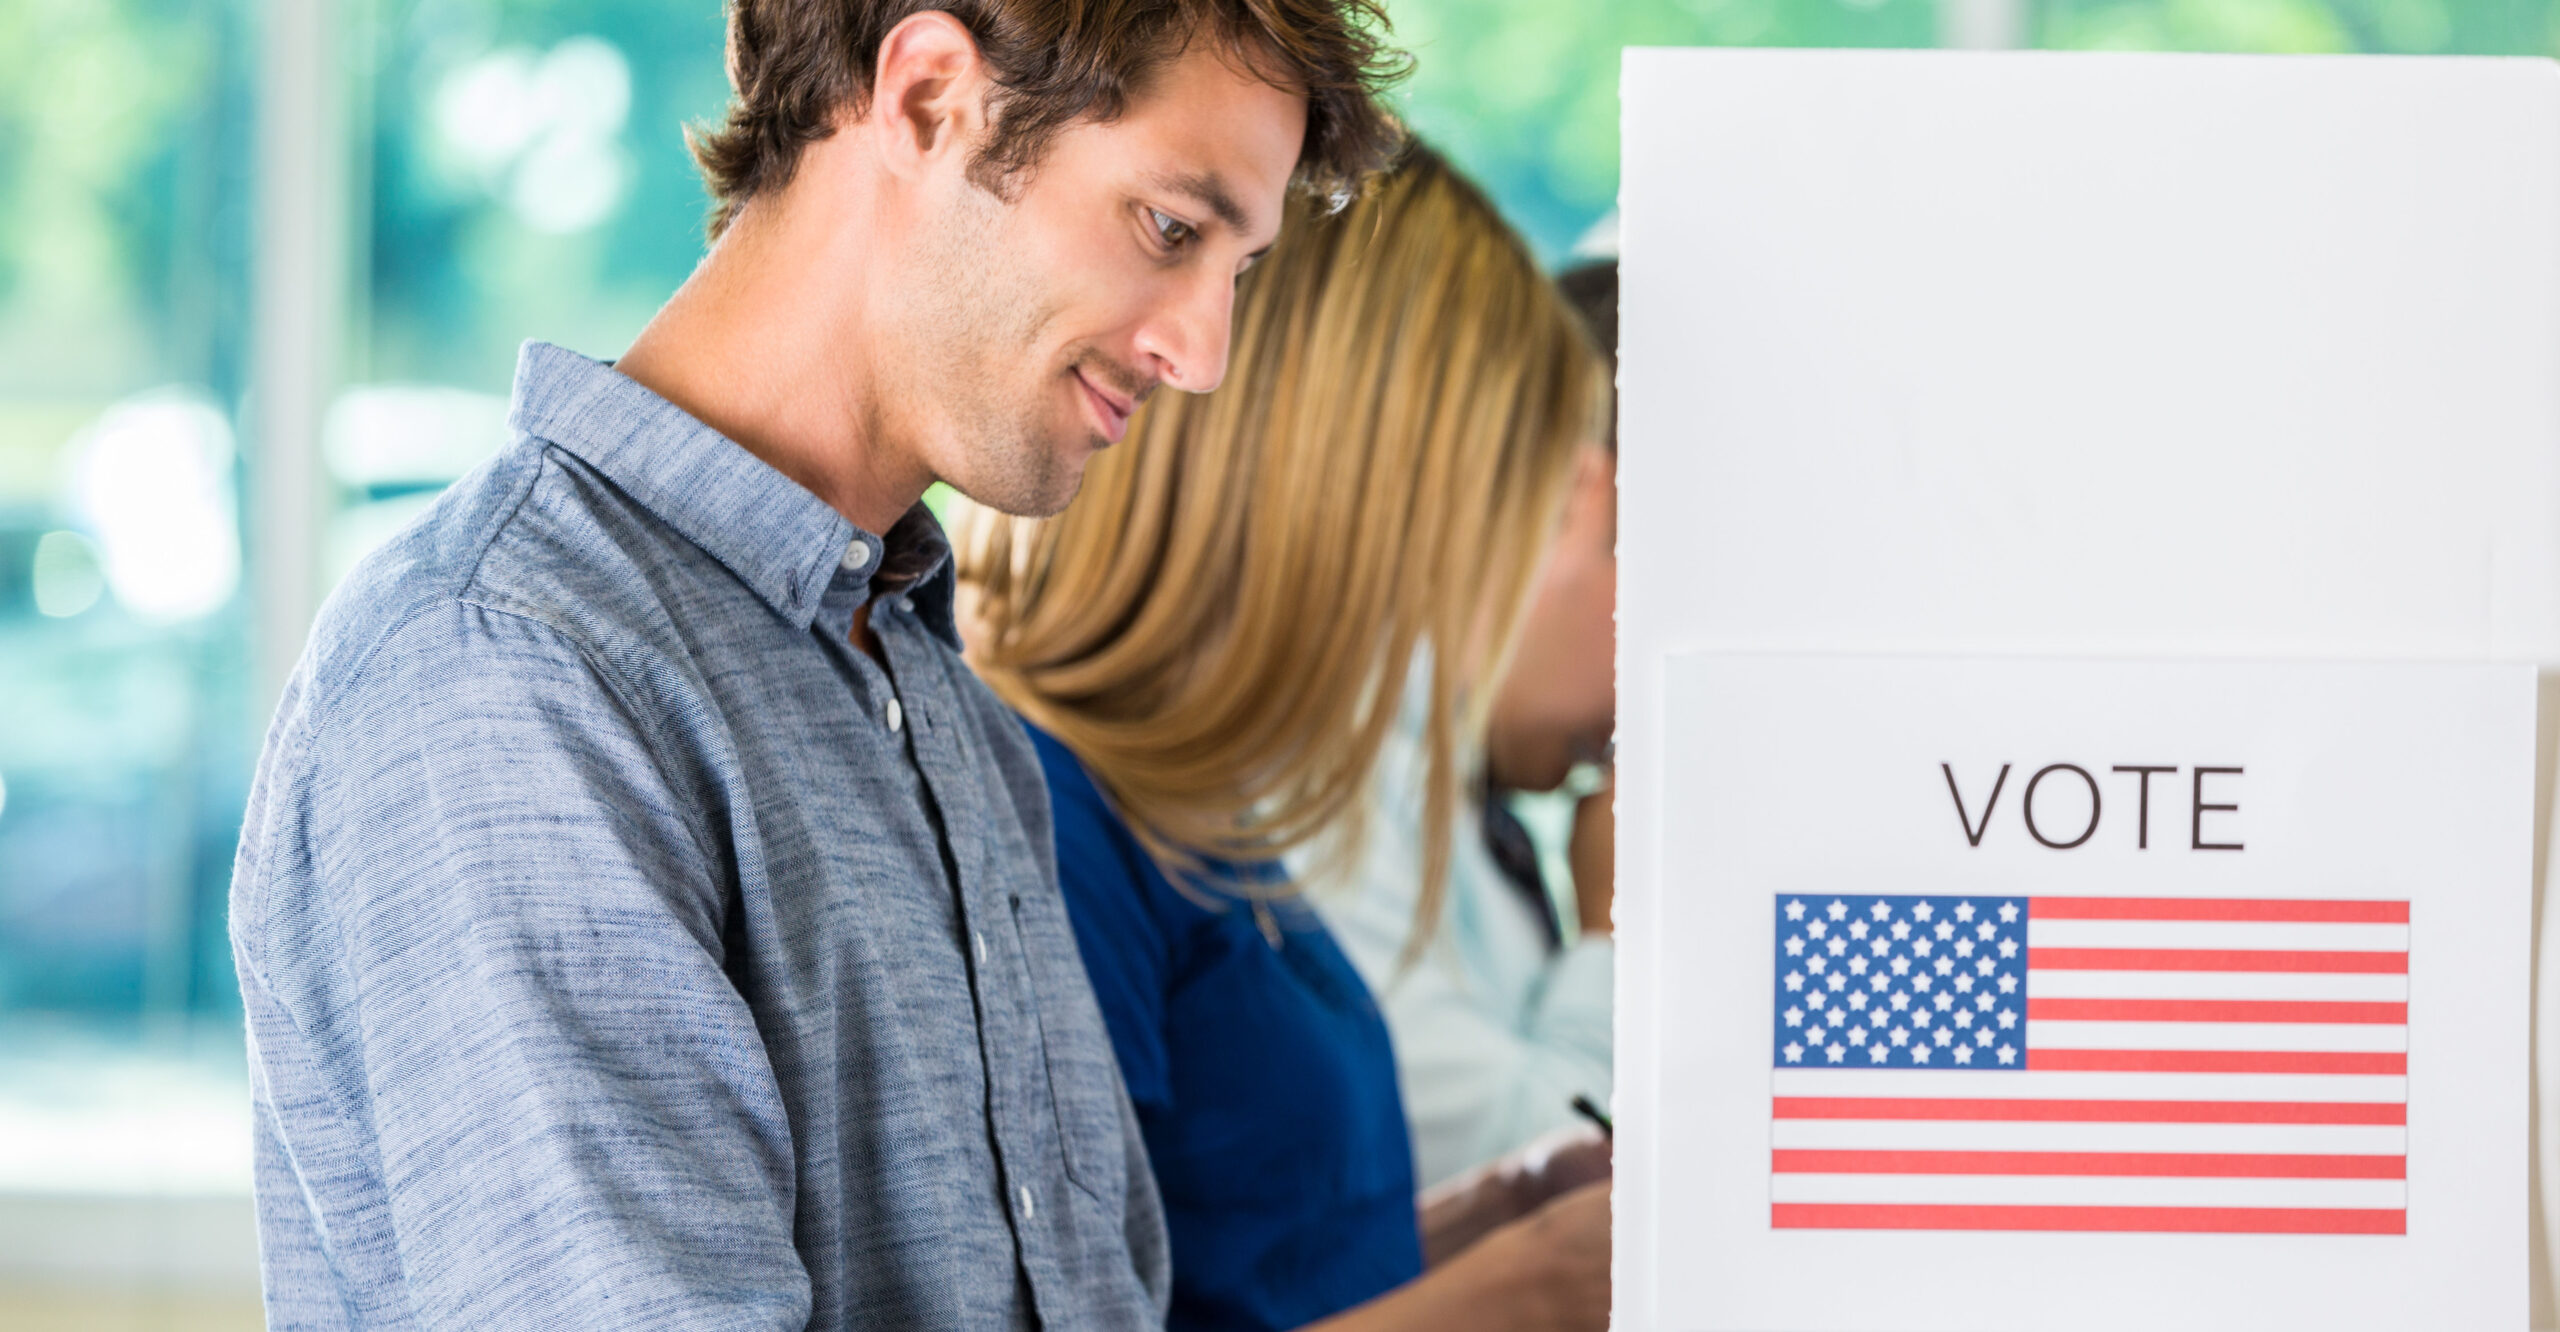 Texas Think Tank Expands Election Integrity Focus to 5 Key Battleground States for 2024